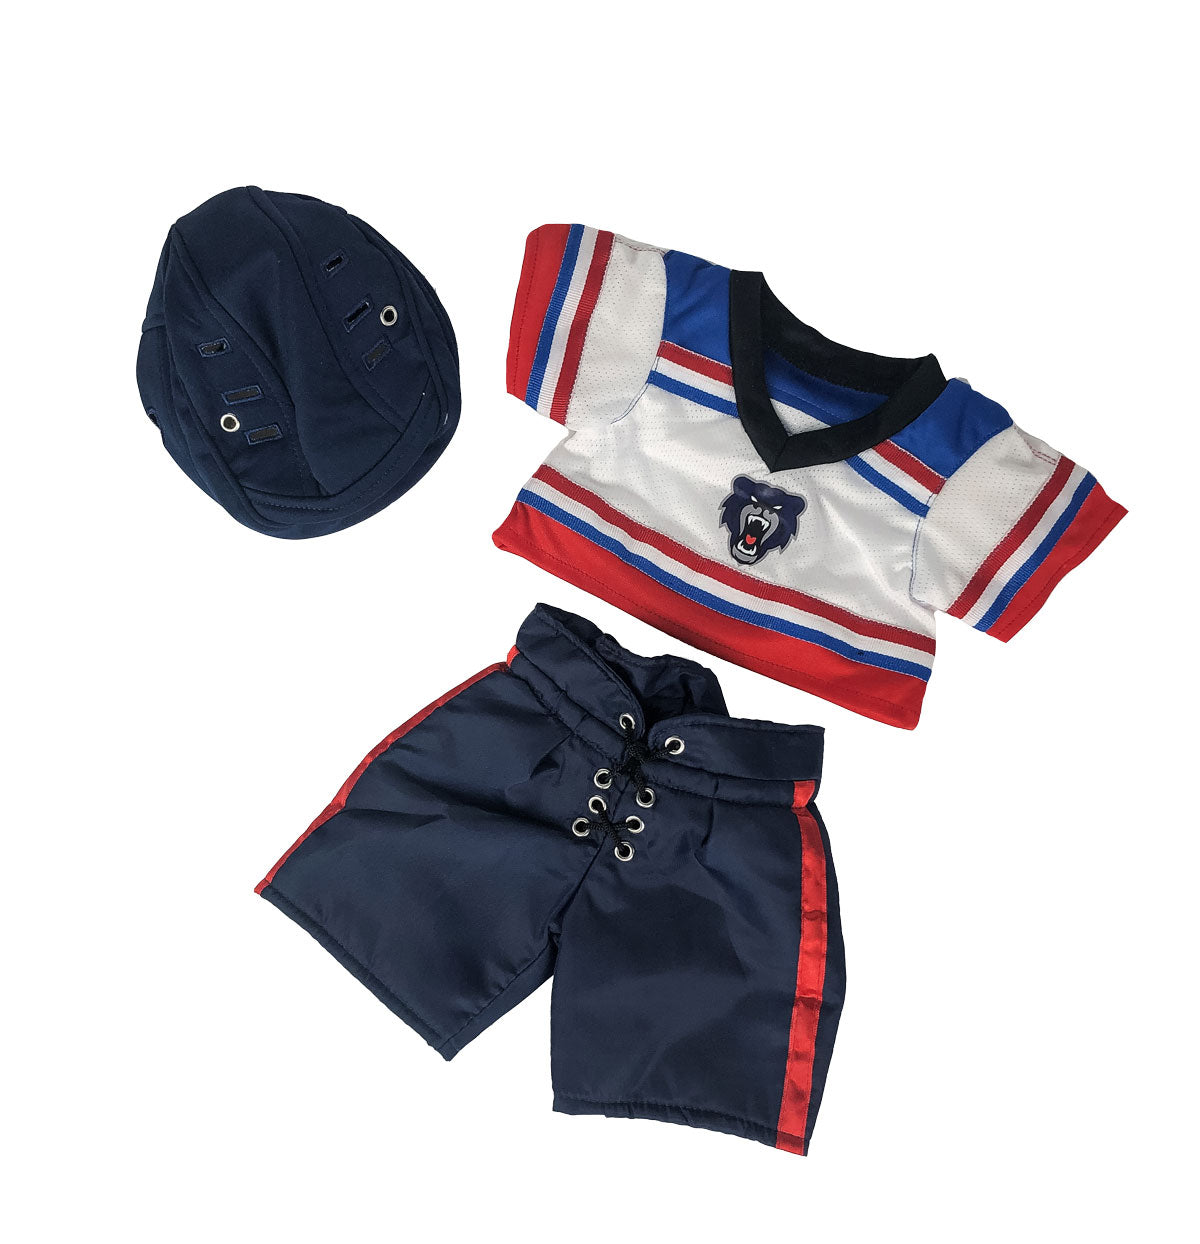 Hocky Uniform (no skates) for the 16" stuffed animal or doll toy